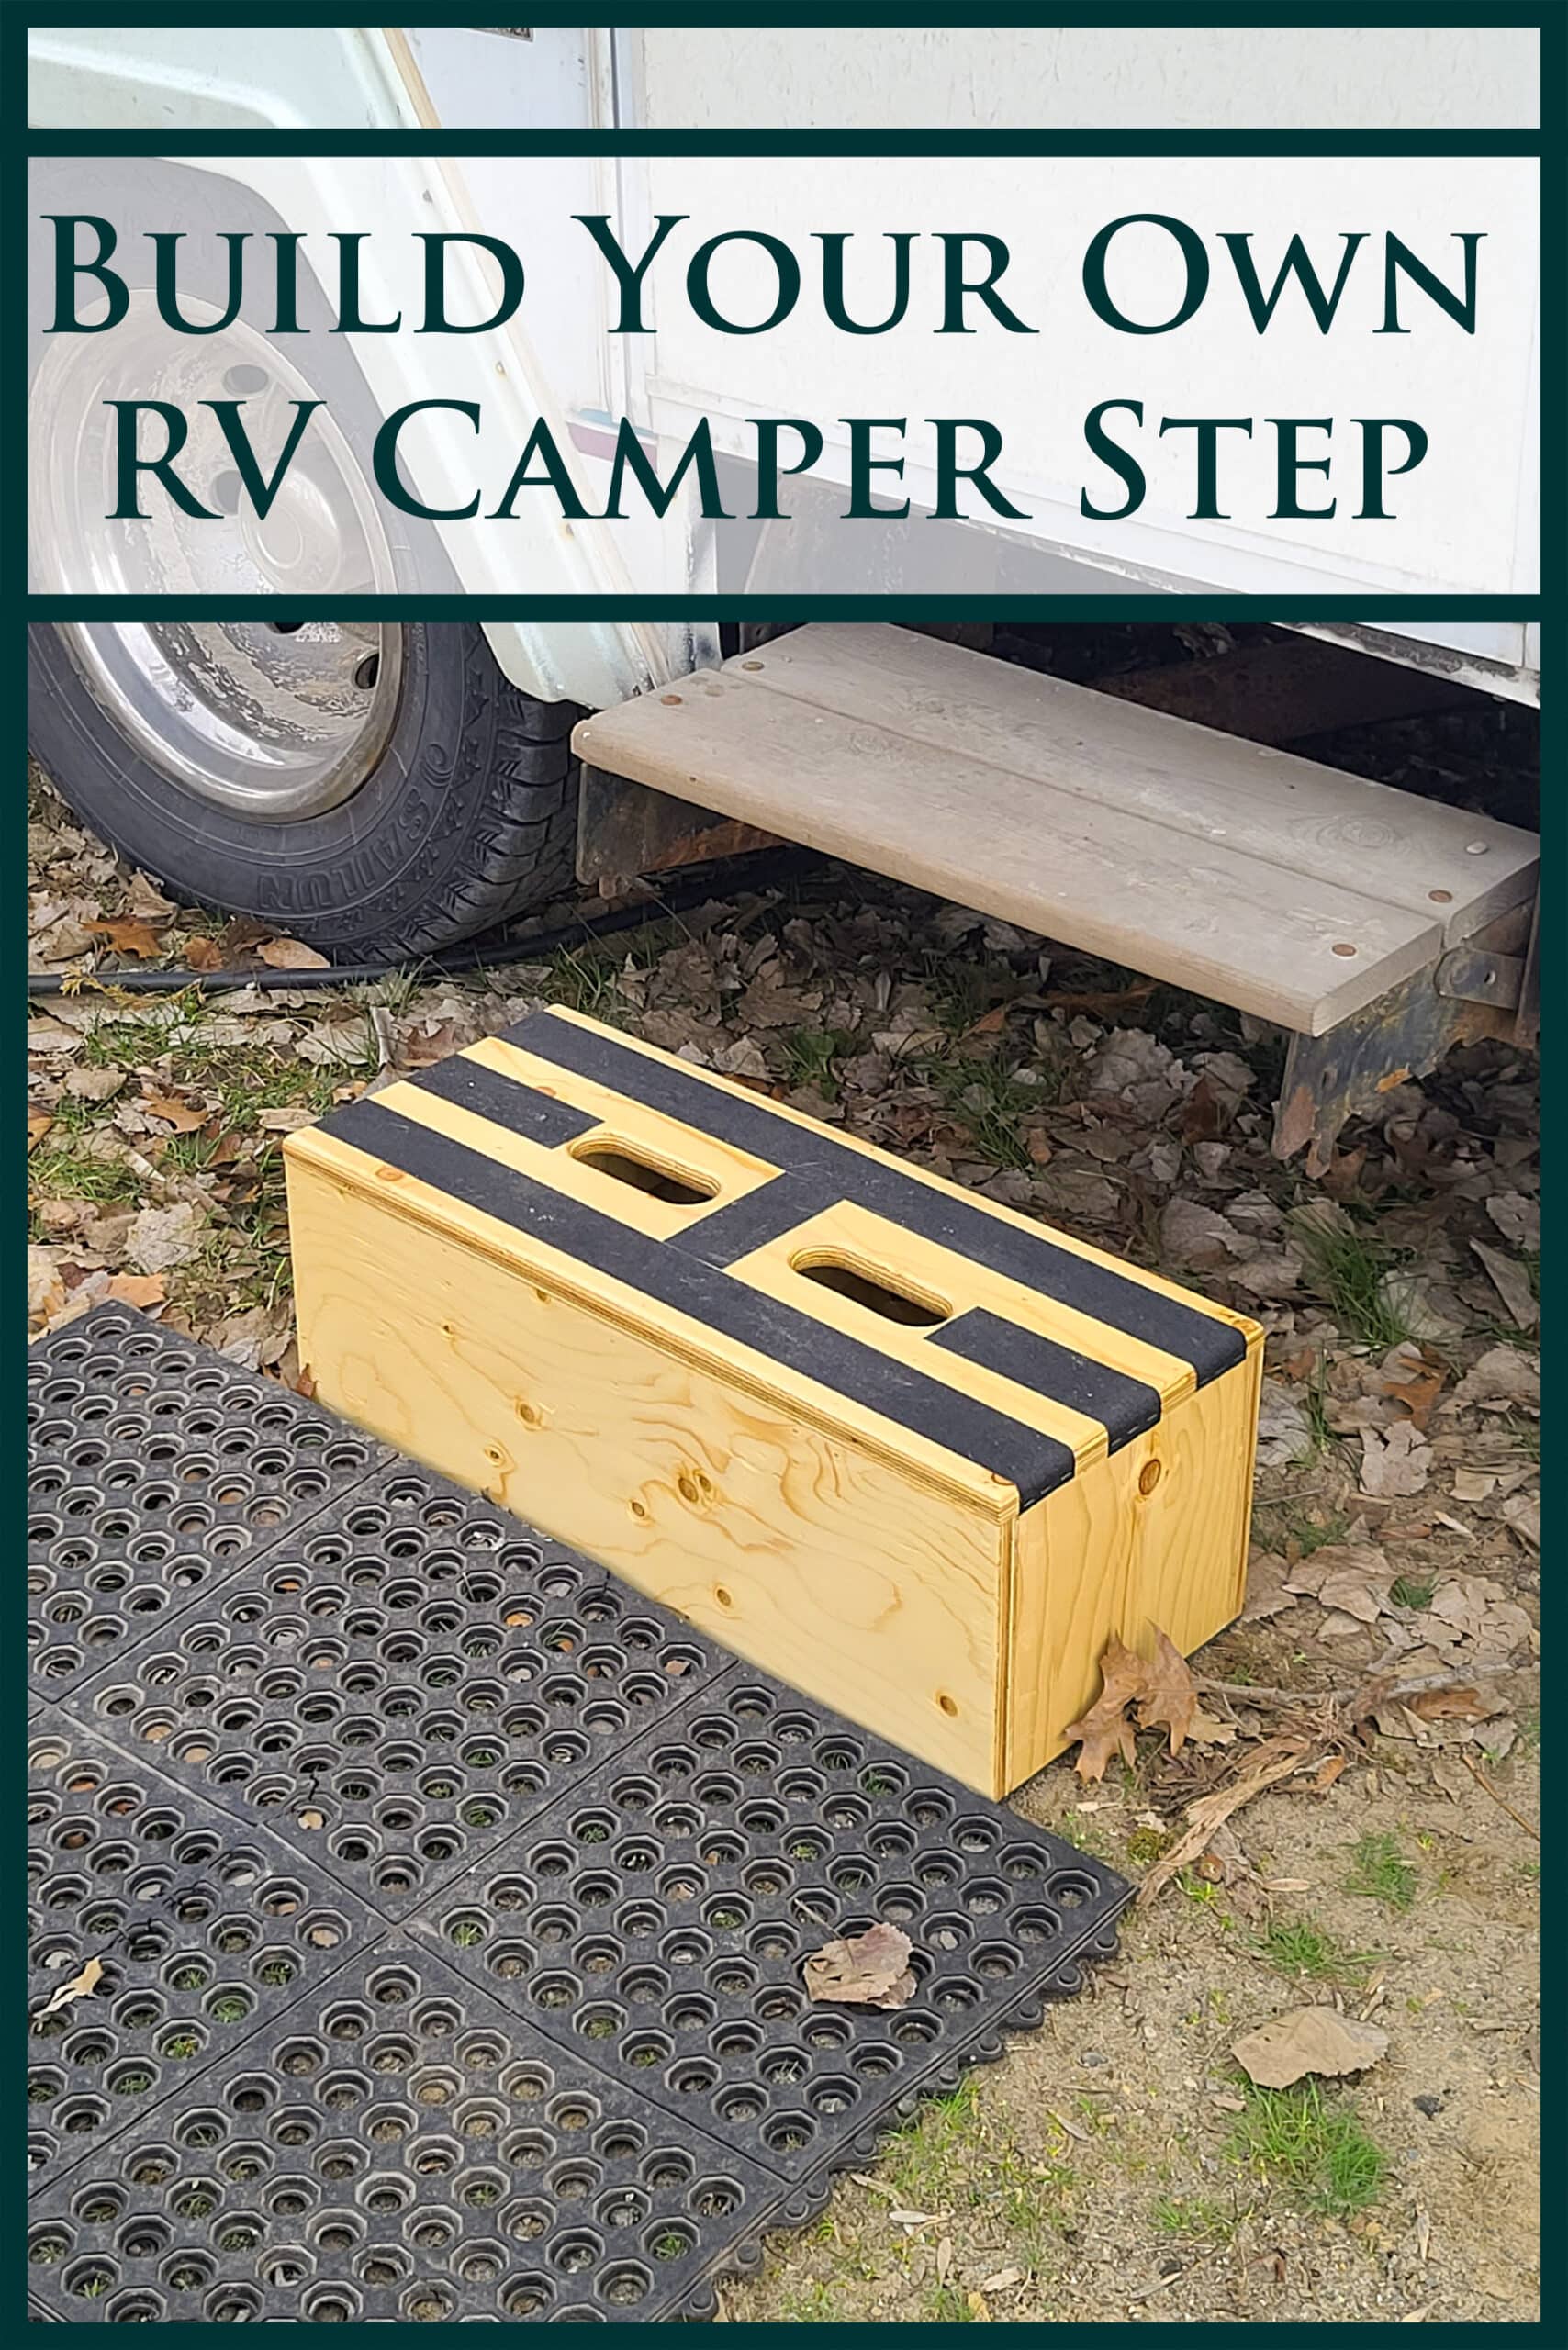 A motorhome with a single fold out step very high. A wood RV camper step below it, and a rubber mat on the ground. Overlaid text says Build Your Own RV Camper Step.